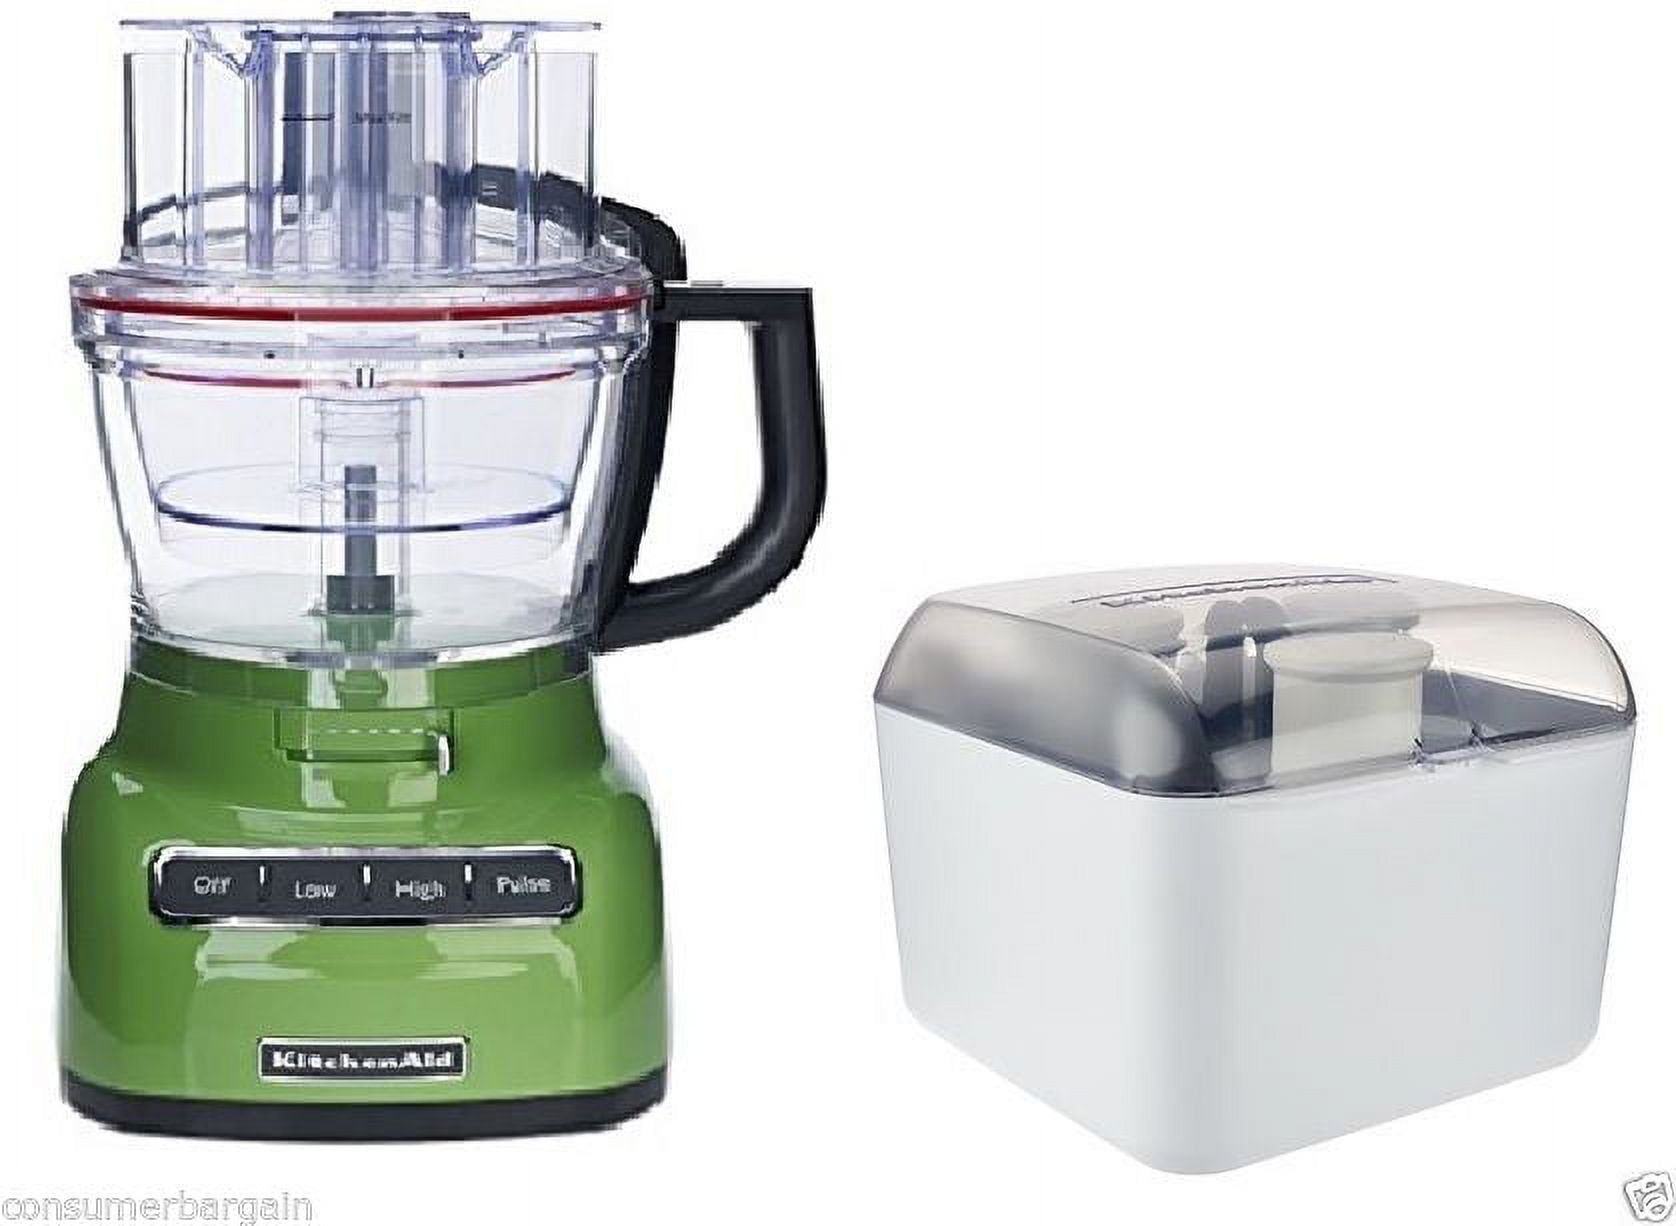 KitchenAid 13-cup Exact Slice Food Processor with Dicing Kit 